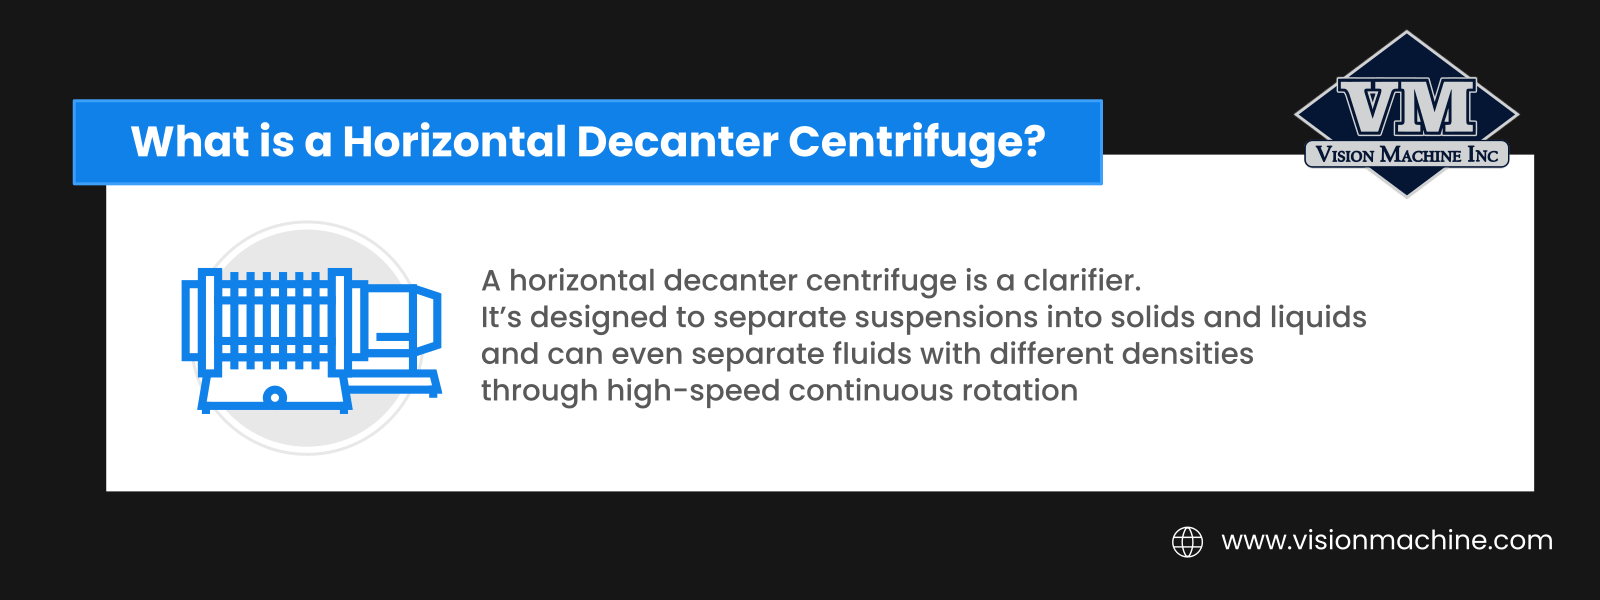 What is a horizontal decanter centrifuge?